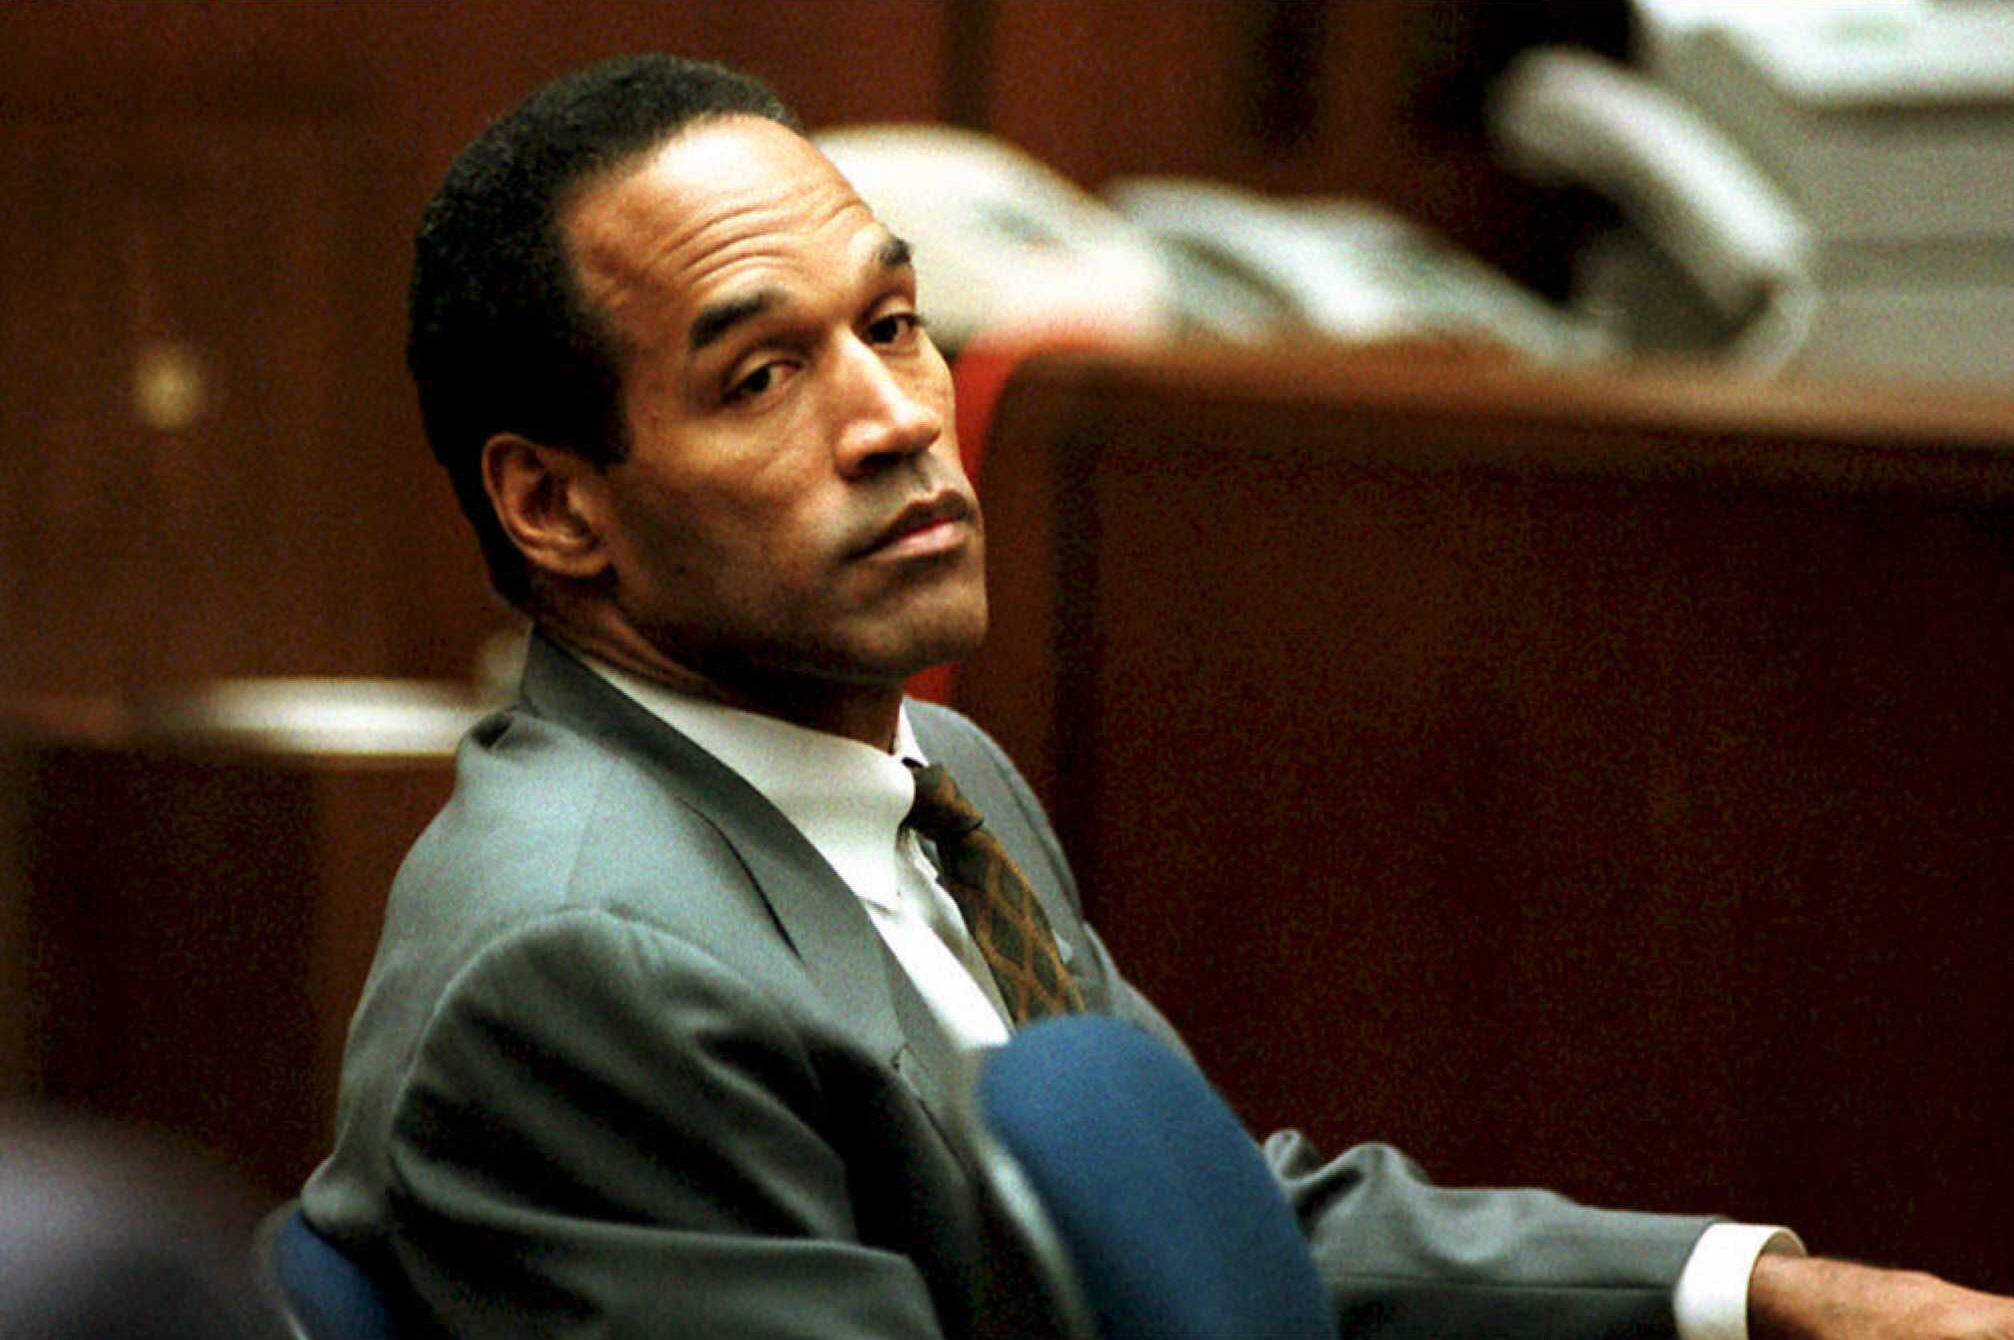 Relive the moment OJ Simpson was found not guilty on Oct. 3, 1995 (Video)